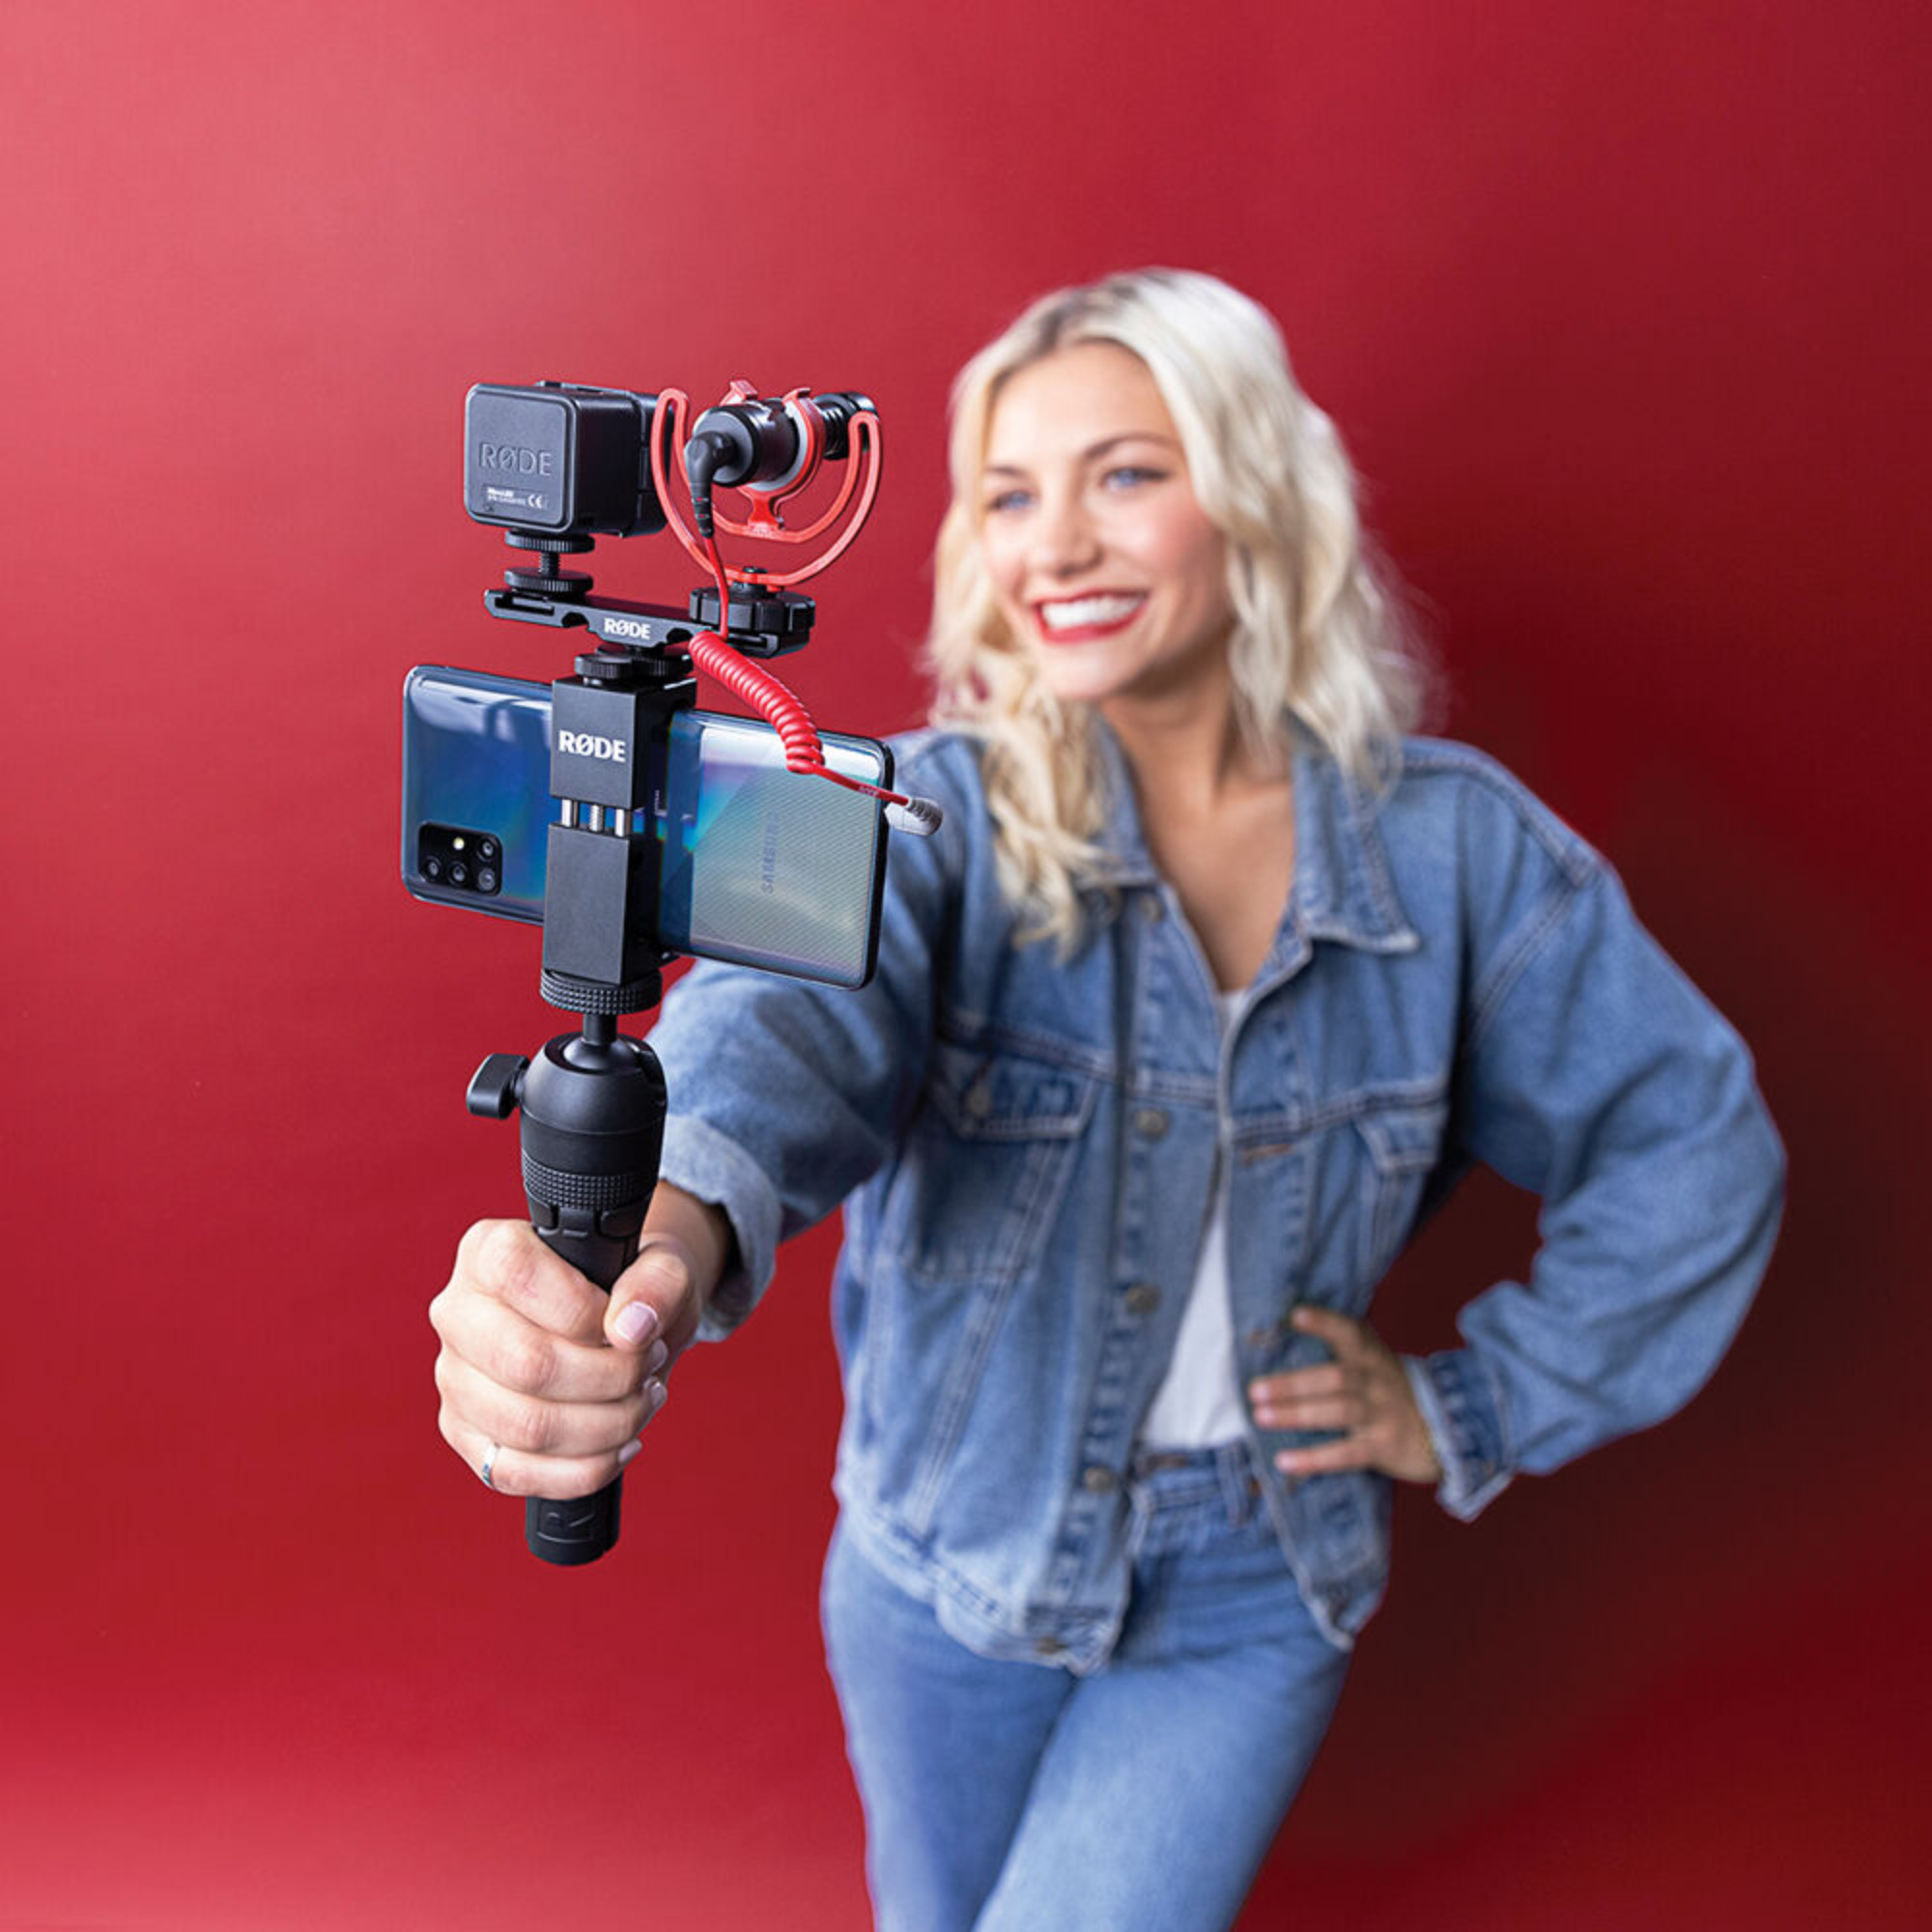 Rode Vlogger Kit, Includes VideoMicro,Tripod 2 , Smart Grip, MicroLED Light and Accessories - Universal